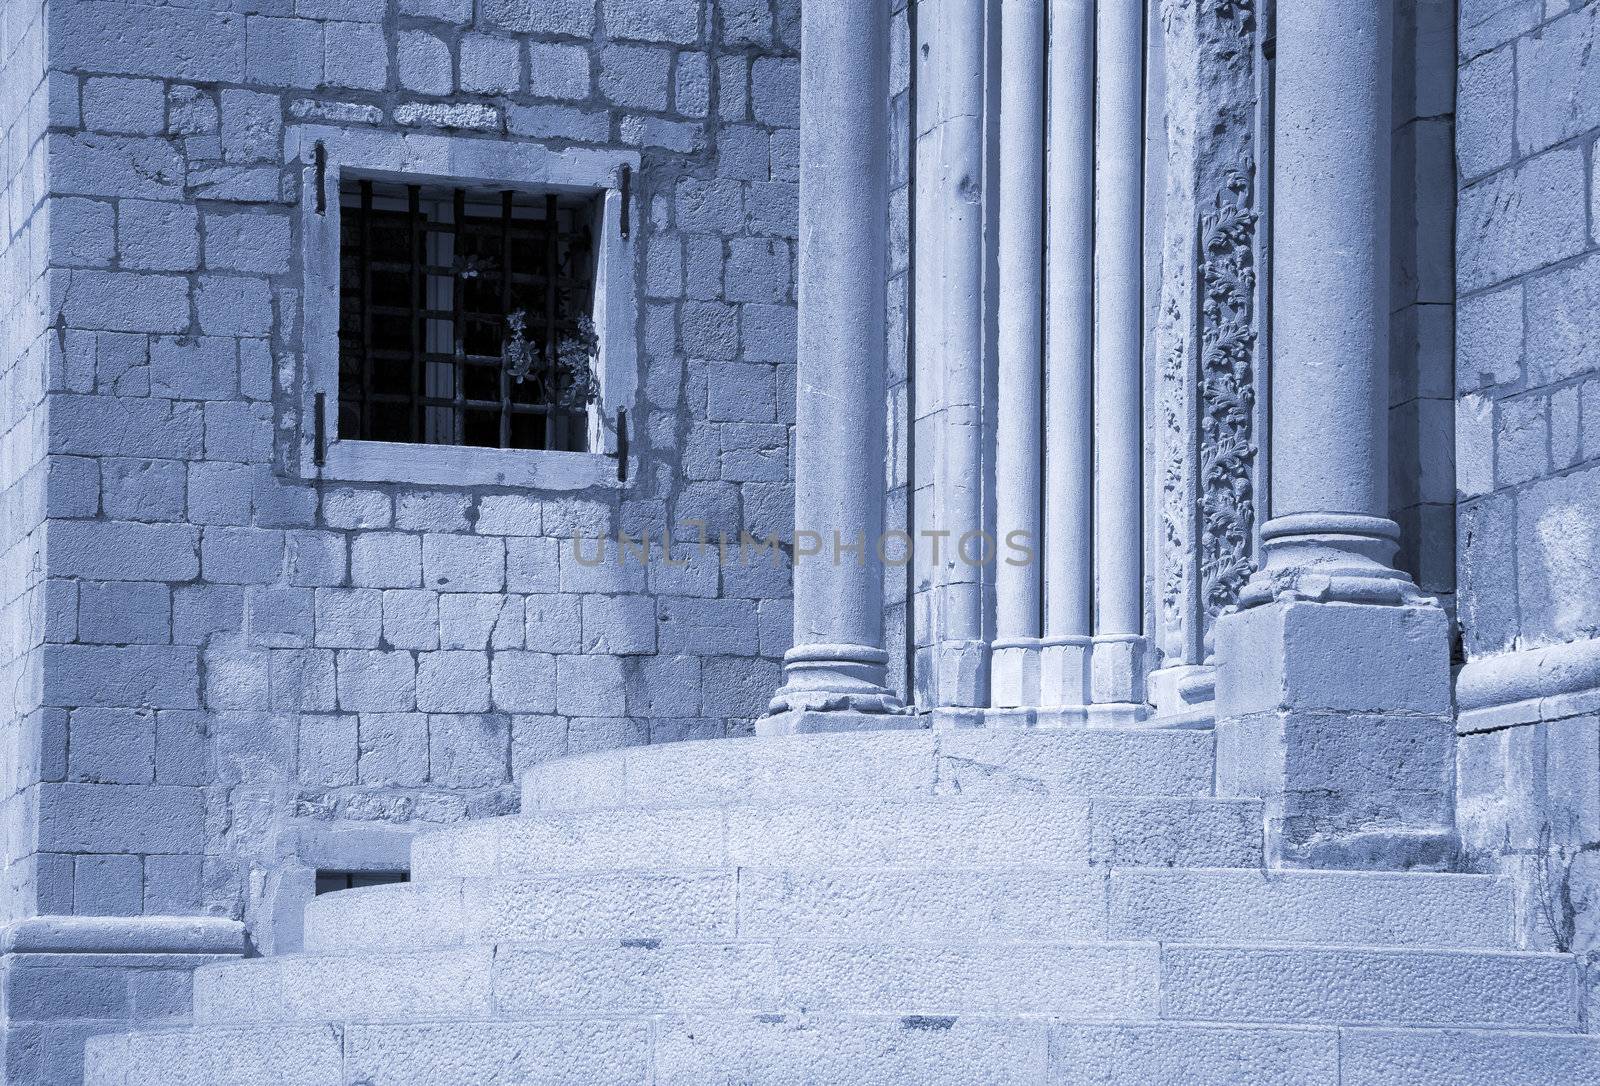 Architectural detail from entrance of church in the old town of Dubrovnik, Croatia.